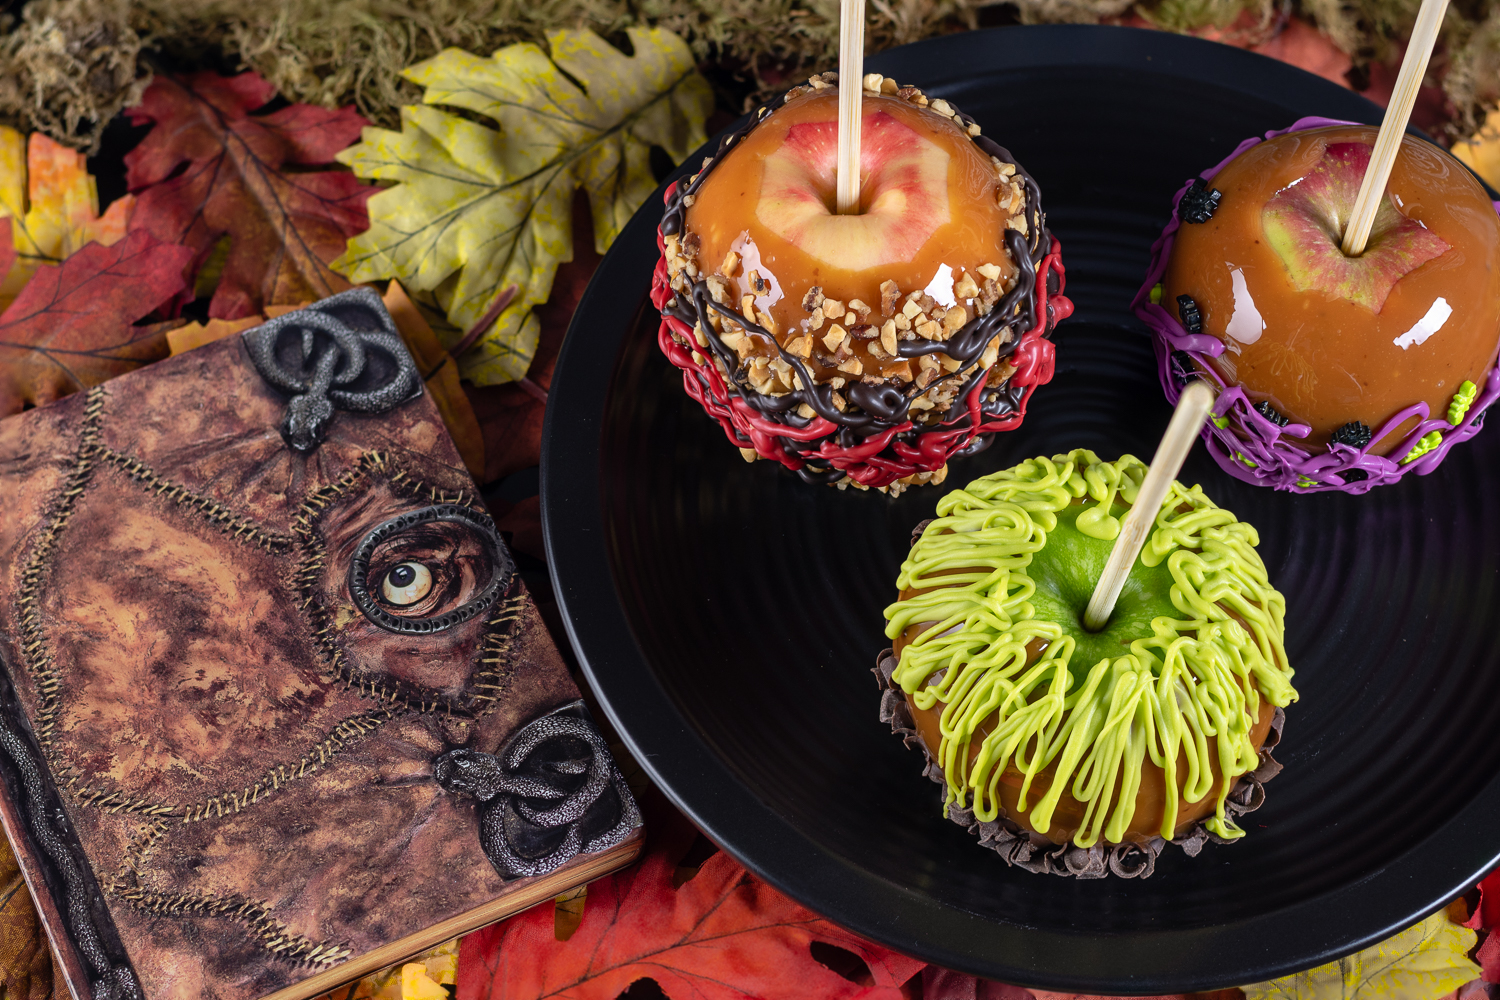 The Geeks are celebrating Halloween early with their recipe for Sanderson Sisters' Caramel Apples inspired by the Disney film Hocus Pocus! [sponsored] 2geekswhoeat.com #CaramelApples  #DisneyRecipes #HalloweenRecipes #HocusPocus #HocusPocusRecipes